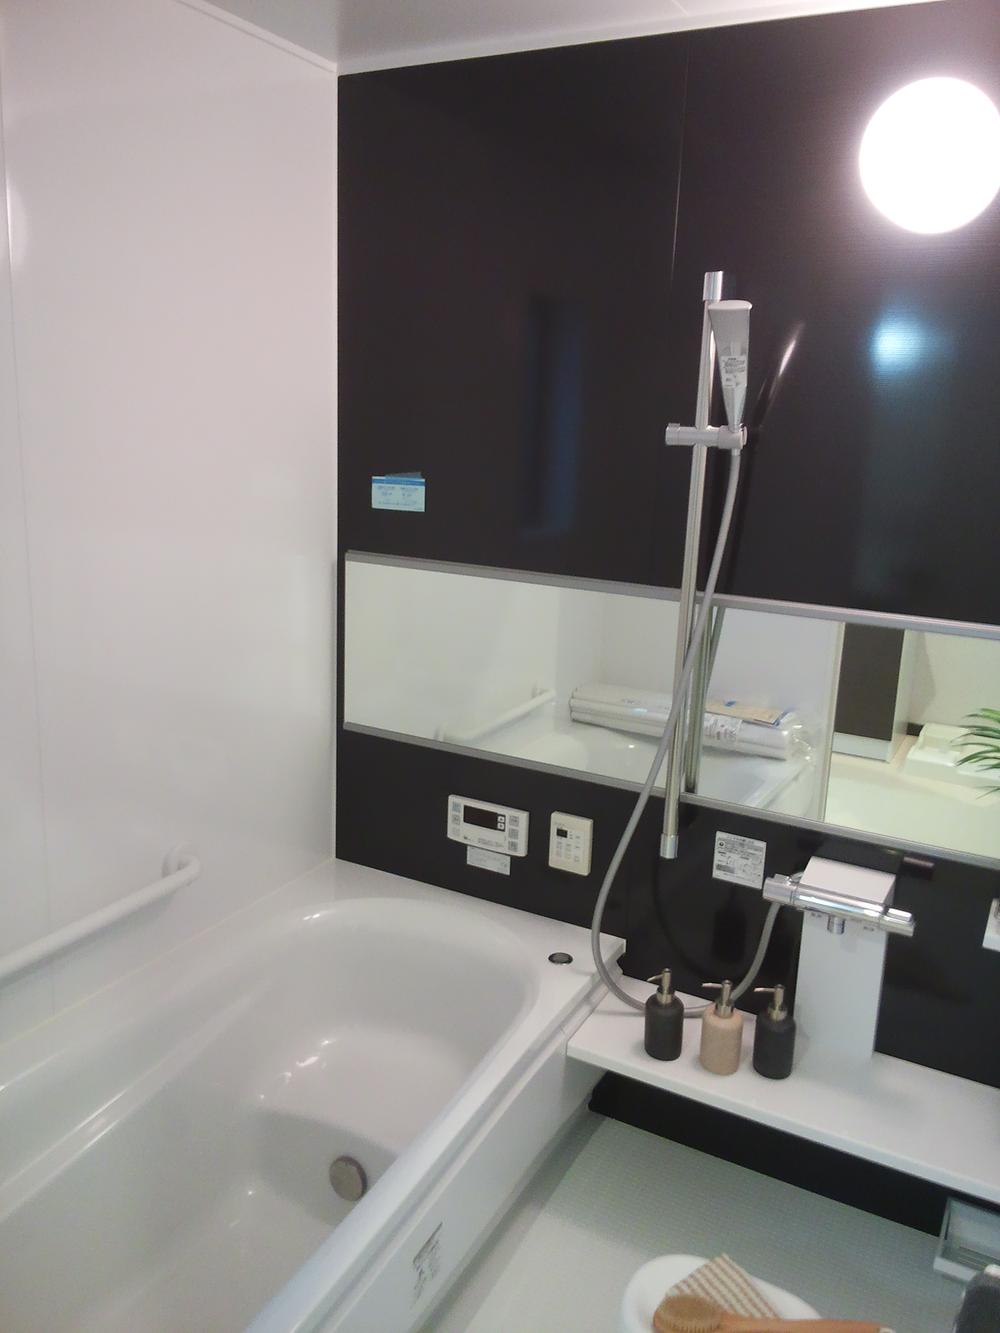 Bathroom. Bathing fashionable and wide tones and black